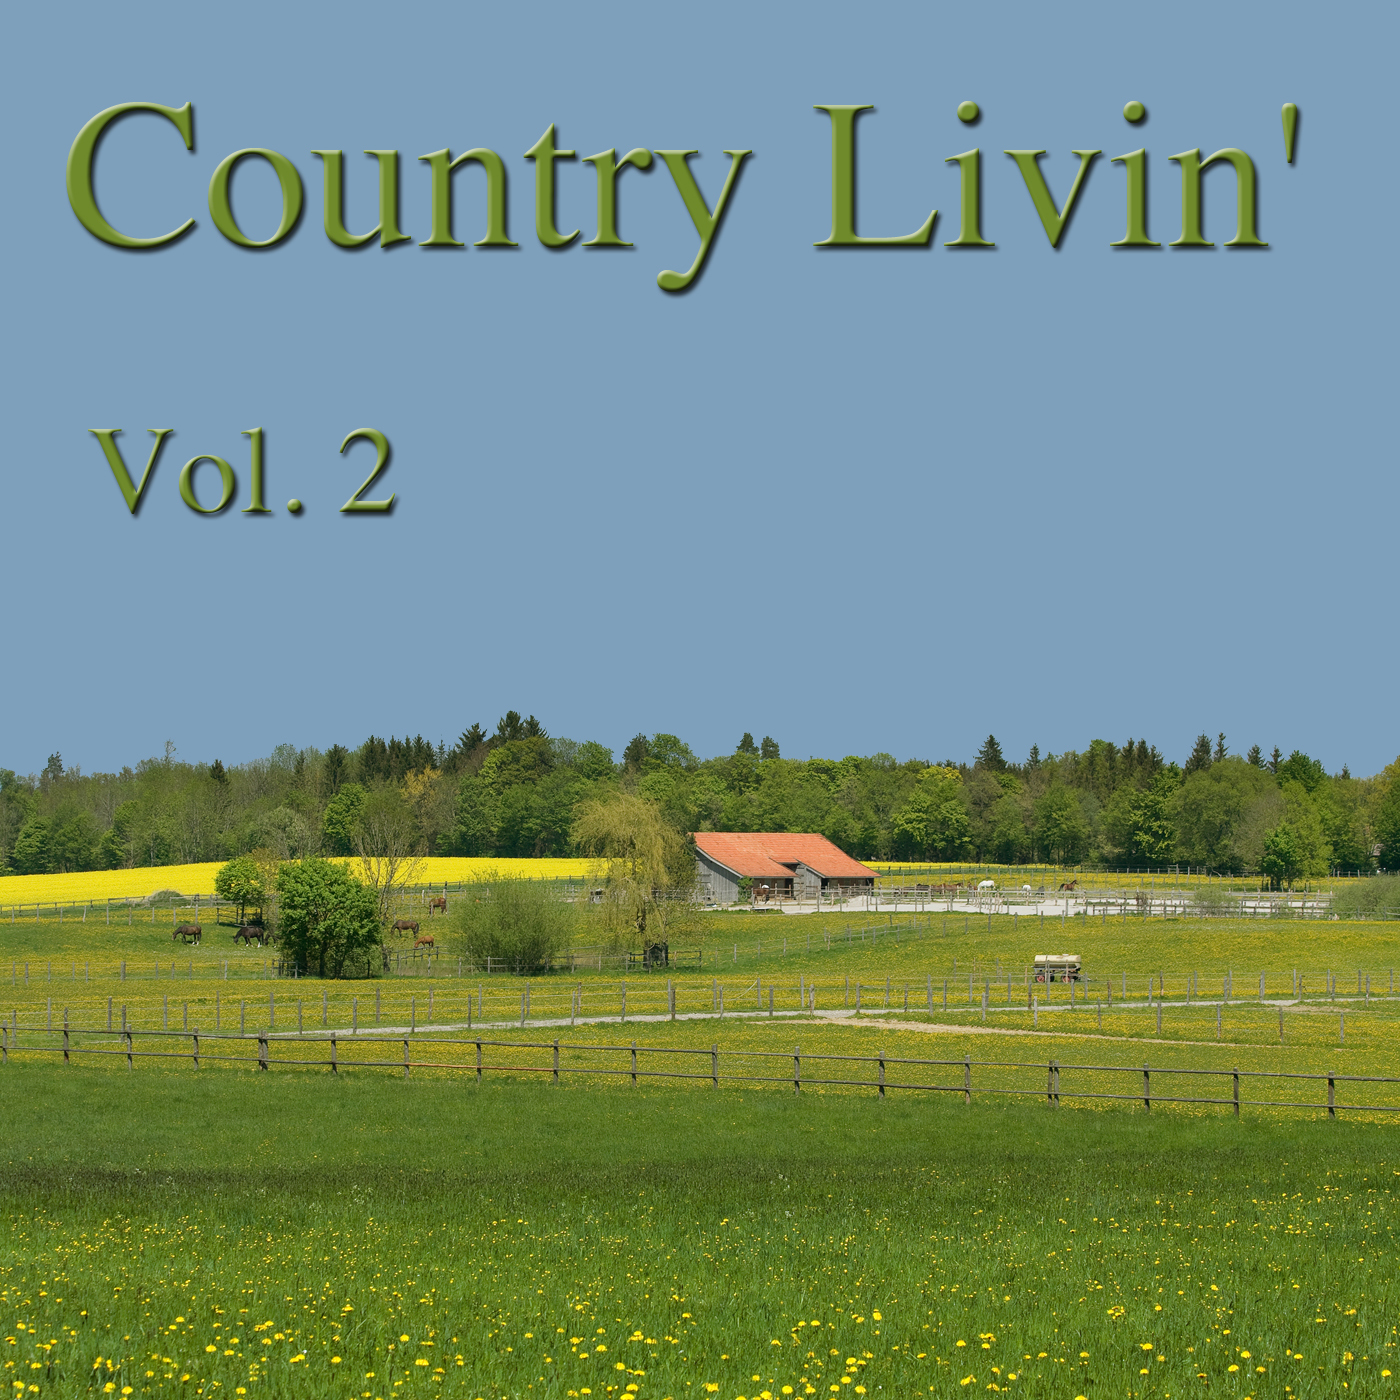 Country Livin' Vol. 2